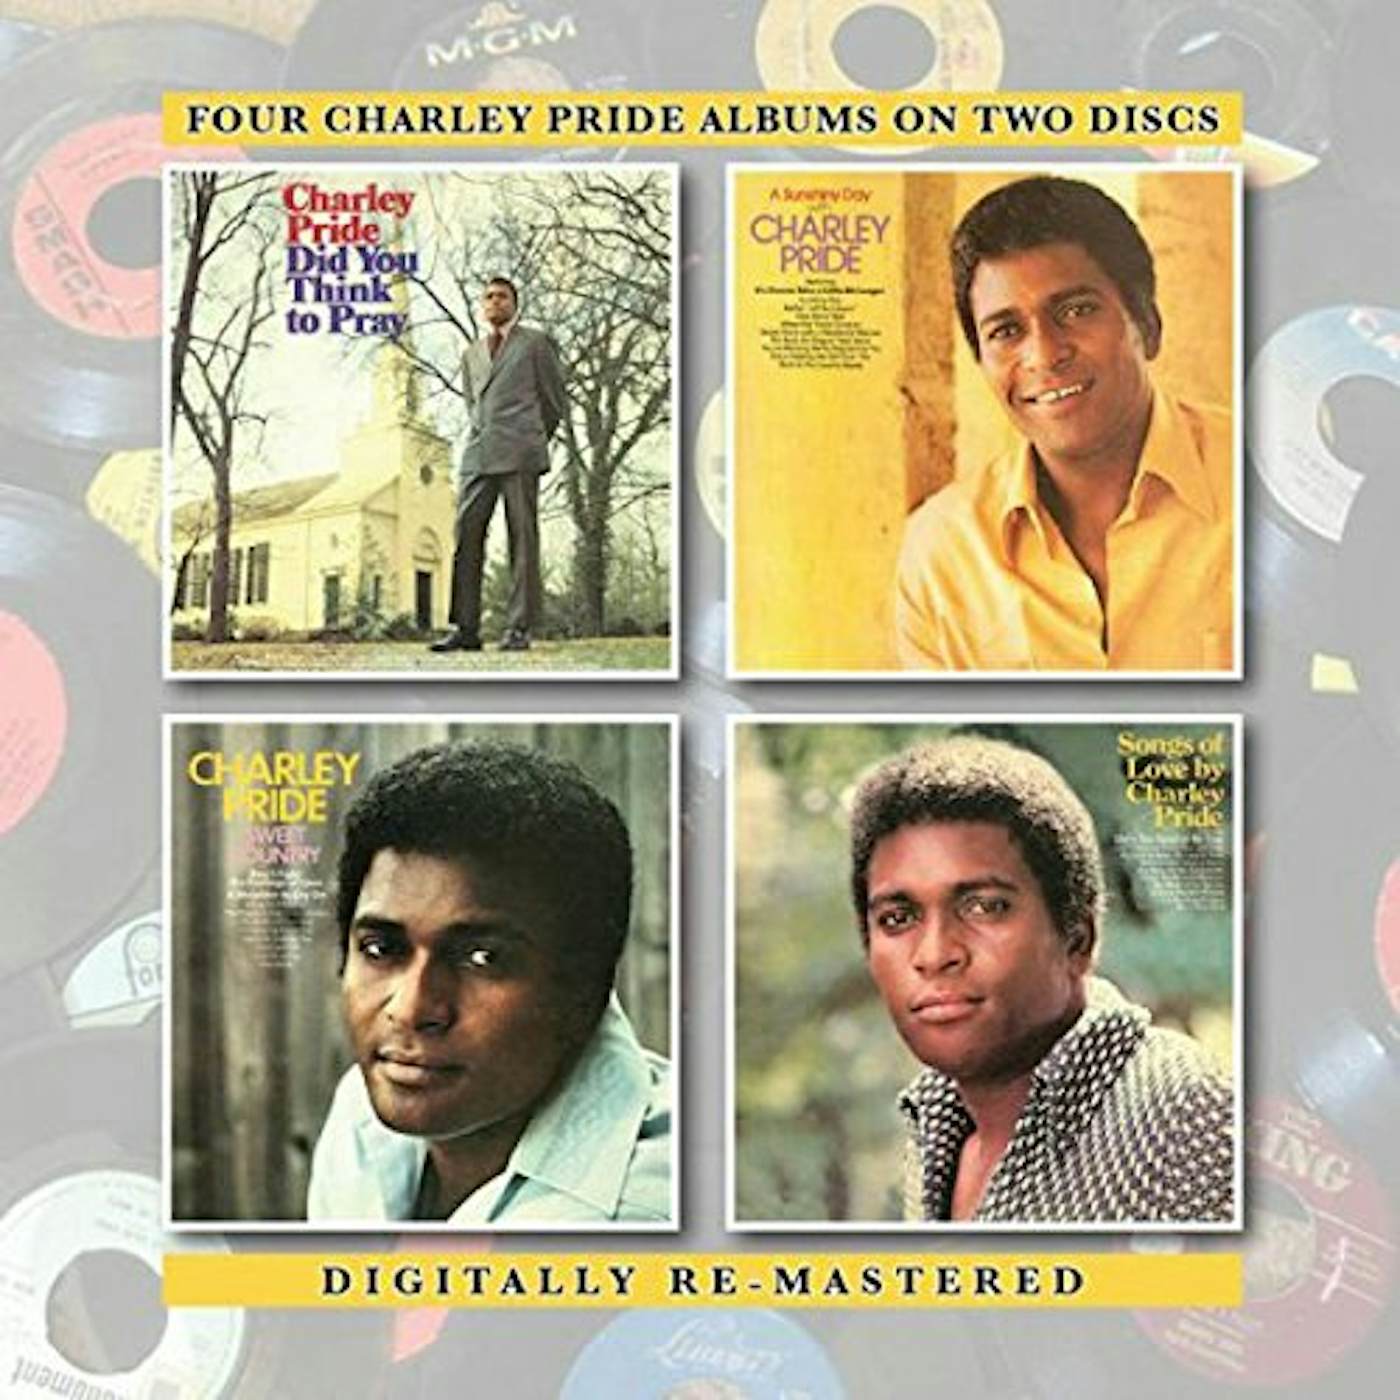 Charley Pride DID YOU THINK TO PRAY /SUNSHINY DAY WITH CHARLEY CD